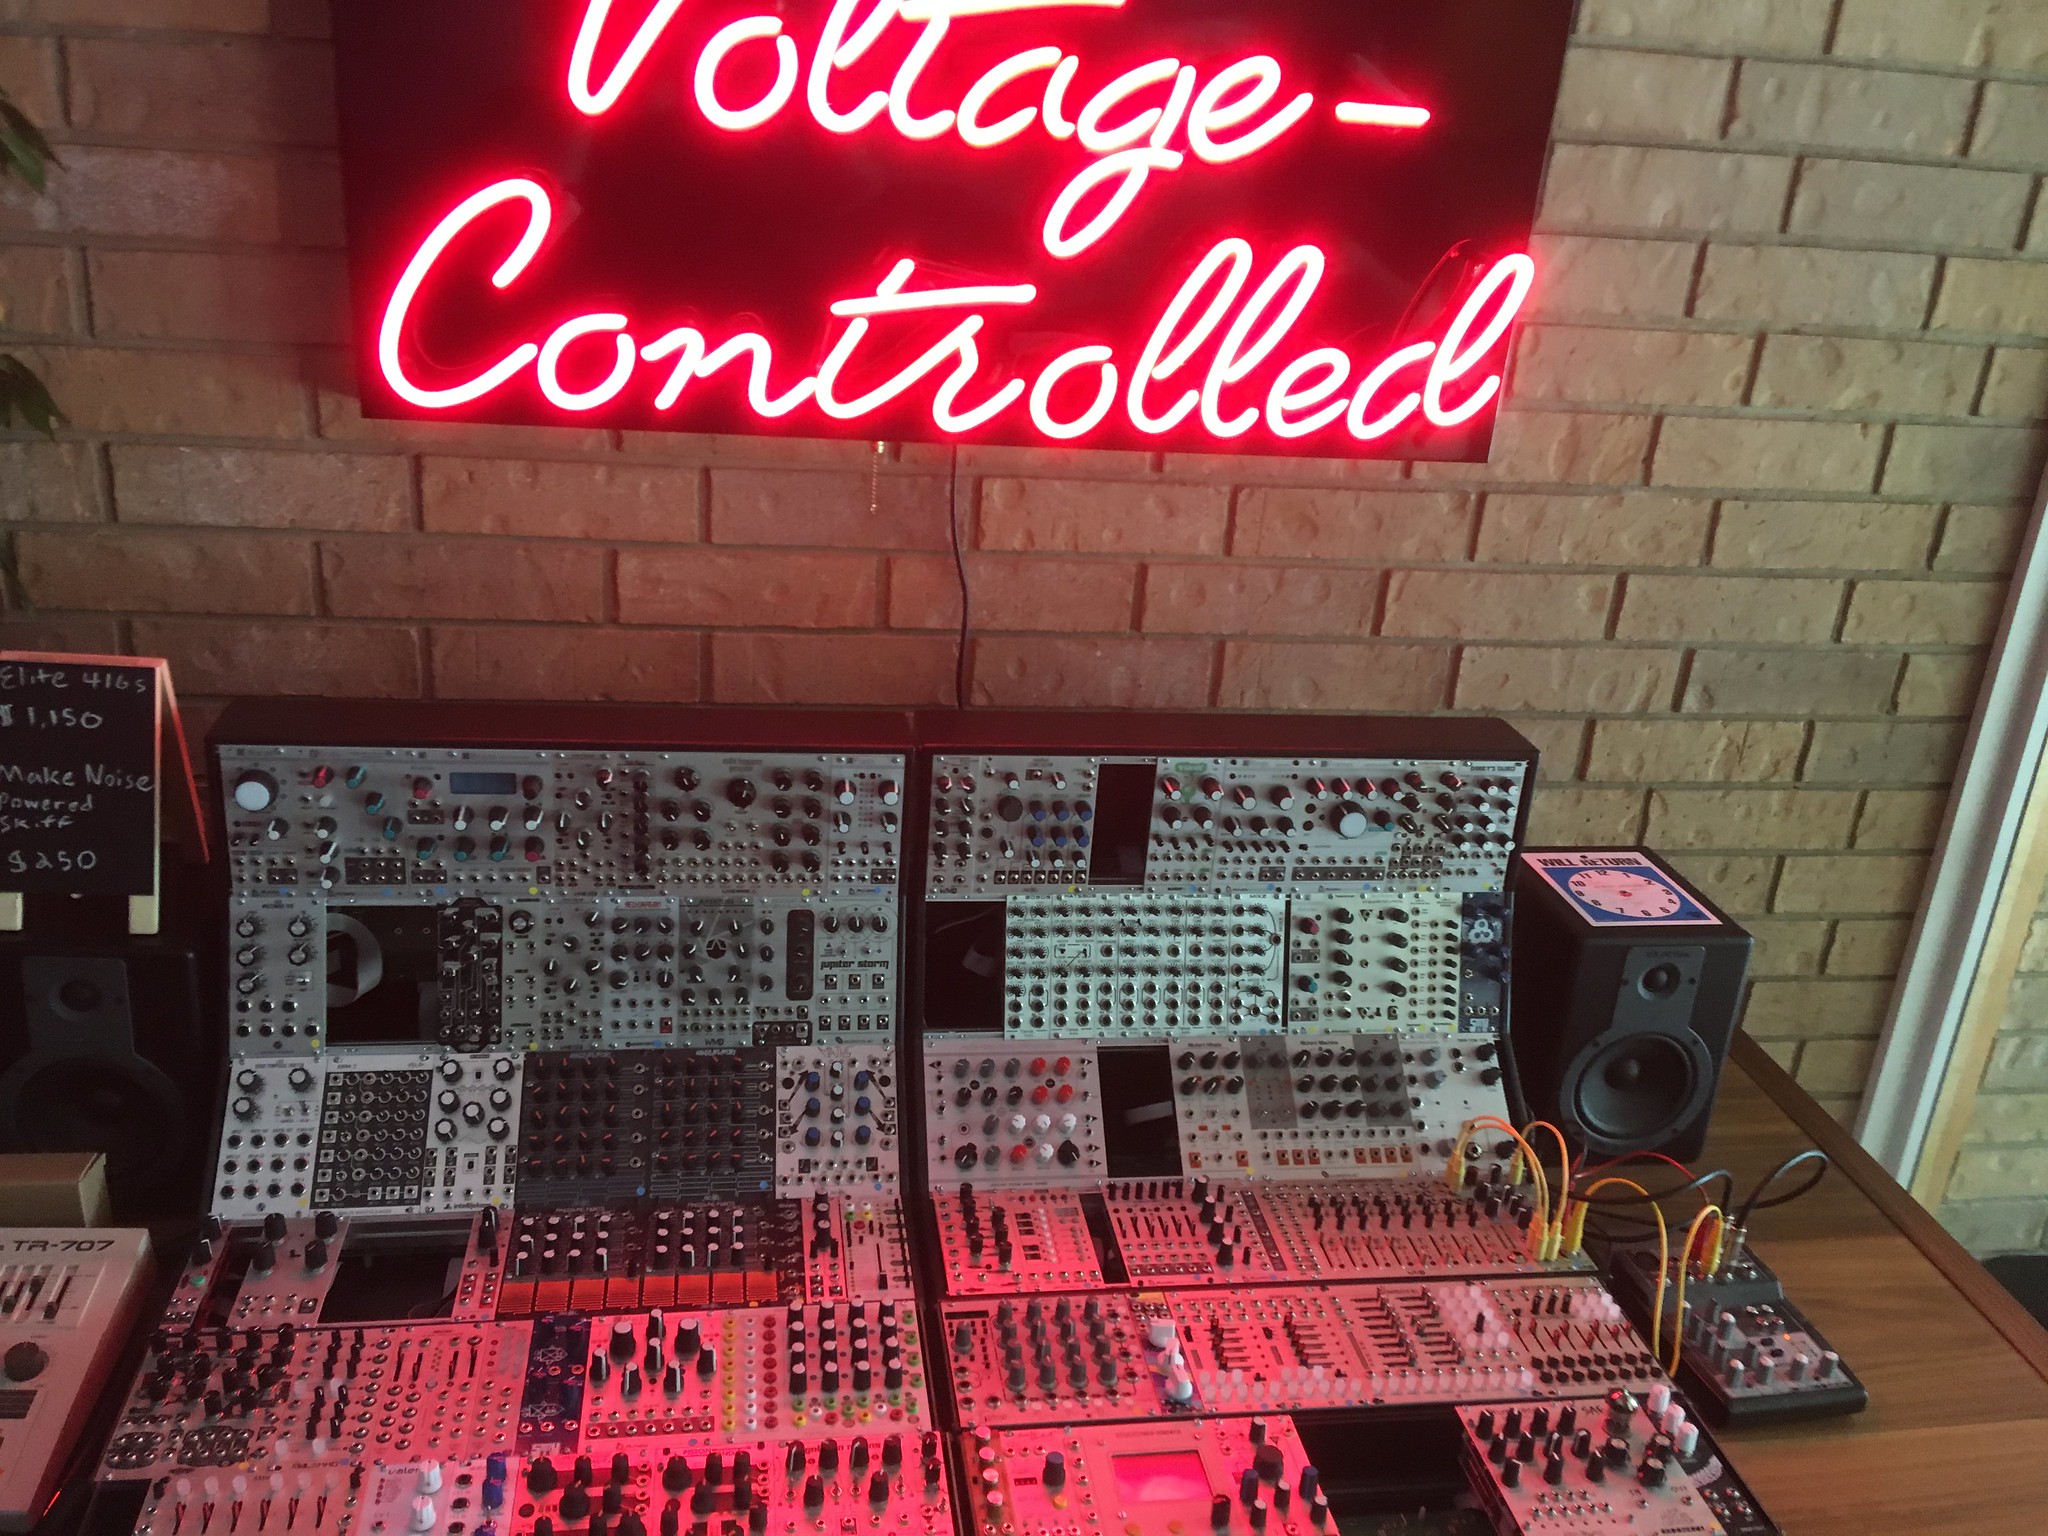 Voltage Controlled